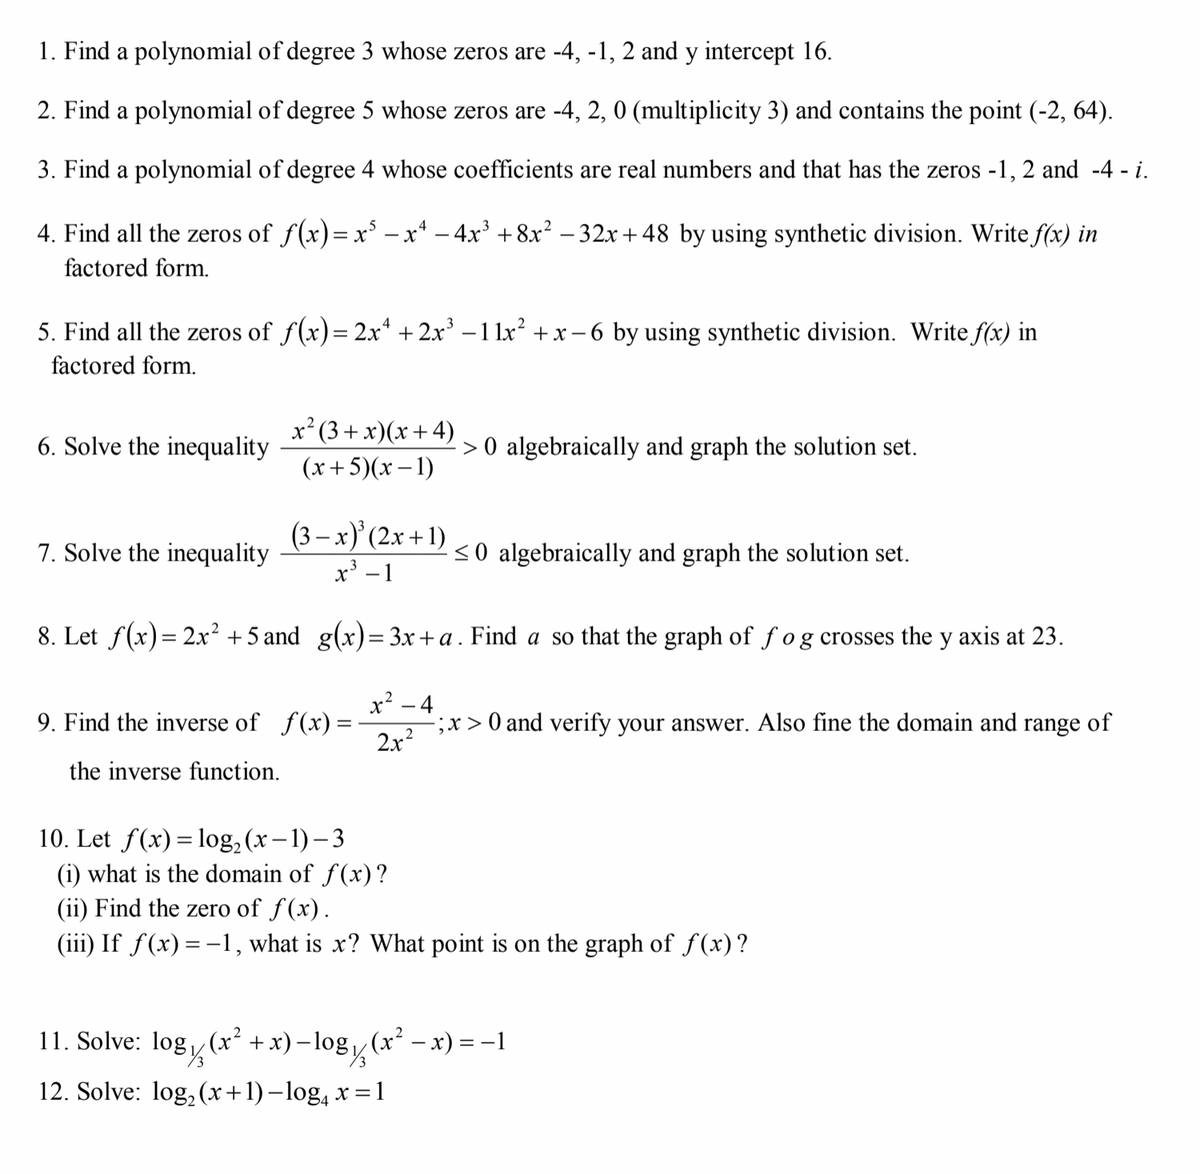 1. Find a polynomial of degree 3 whose zeros are -4, -1, 2 and y intercept 16.
2. Find a polynomial of degree 5 whose zeros are -4, 2, 0 (multiplicity 3) and contains the point (-2, 64).
3. Find a polynomial of degree 4 whose coefficients are real numbers and that has the zeros -1, 2 and -4 - i.
4. Find all the zeros of f(x)=x* – x* – 4x³ +8x² – 32x+ 48 by using synthetic division. Write f(x) in
factored form.
5. Find all the zeros of f(x)= 2x* + 2x' – 1 lx² + x - 6 by using synthetic division. Write f(x) in
factored form.
x²(3 + x)(x+4)
6. Solve the inequality
> 0 algebraically and graph the solution set.
(x+5)(x – 1)
(3 – x)' (2x + 1)
x³ – 1
7. Solve the inequality
<0 algebraically and graph the solution set.
8. Let f(x)= 2x² +5 and g(x)=3x+a . Find a so that the graph of fog crosses the y axis at 23.
x² - 4
;x > 0 and verify your answer. Also fine the domain and range of
2x?
9. Find the inverse of f(x) =
the inverse function.
10. Let f(x)= log, (x–1) – 3
(i) what is the domain of f(x)?
(ii) Find the zero of f(x).
(iii) If f(x)=-1, what is x? What point is on the graph of f(x)?
11. Solve:
(x² +x)–log (x – x) = -1
12. Solve: log, (x+1)–log, x =1
